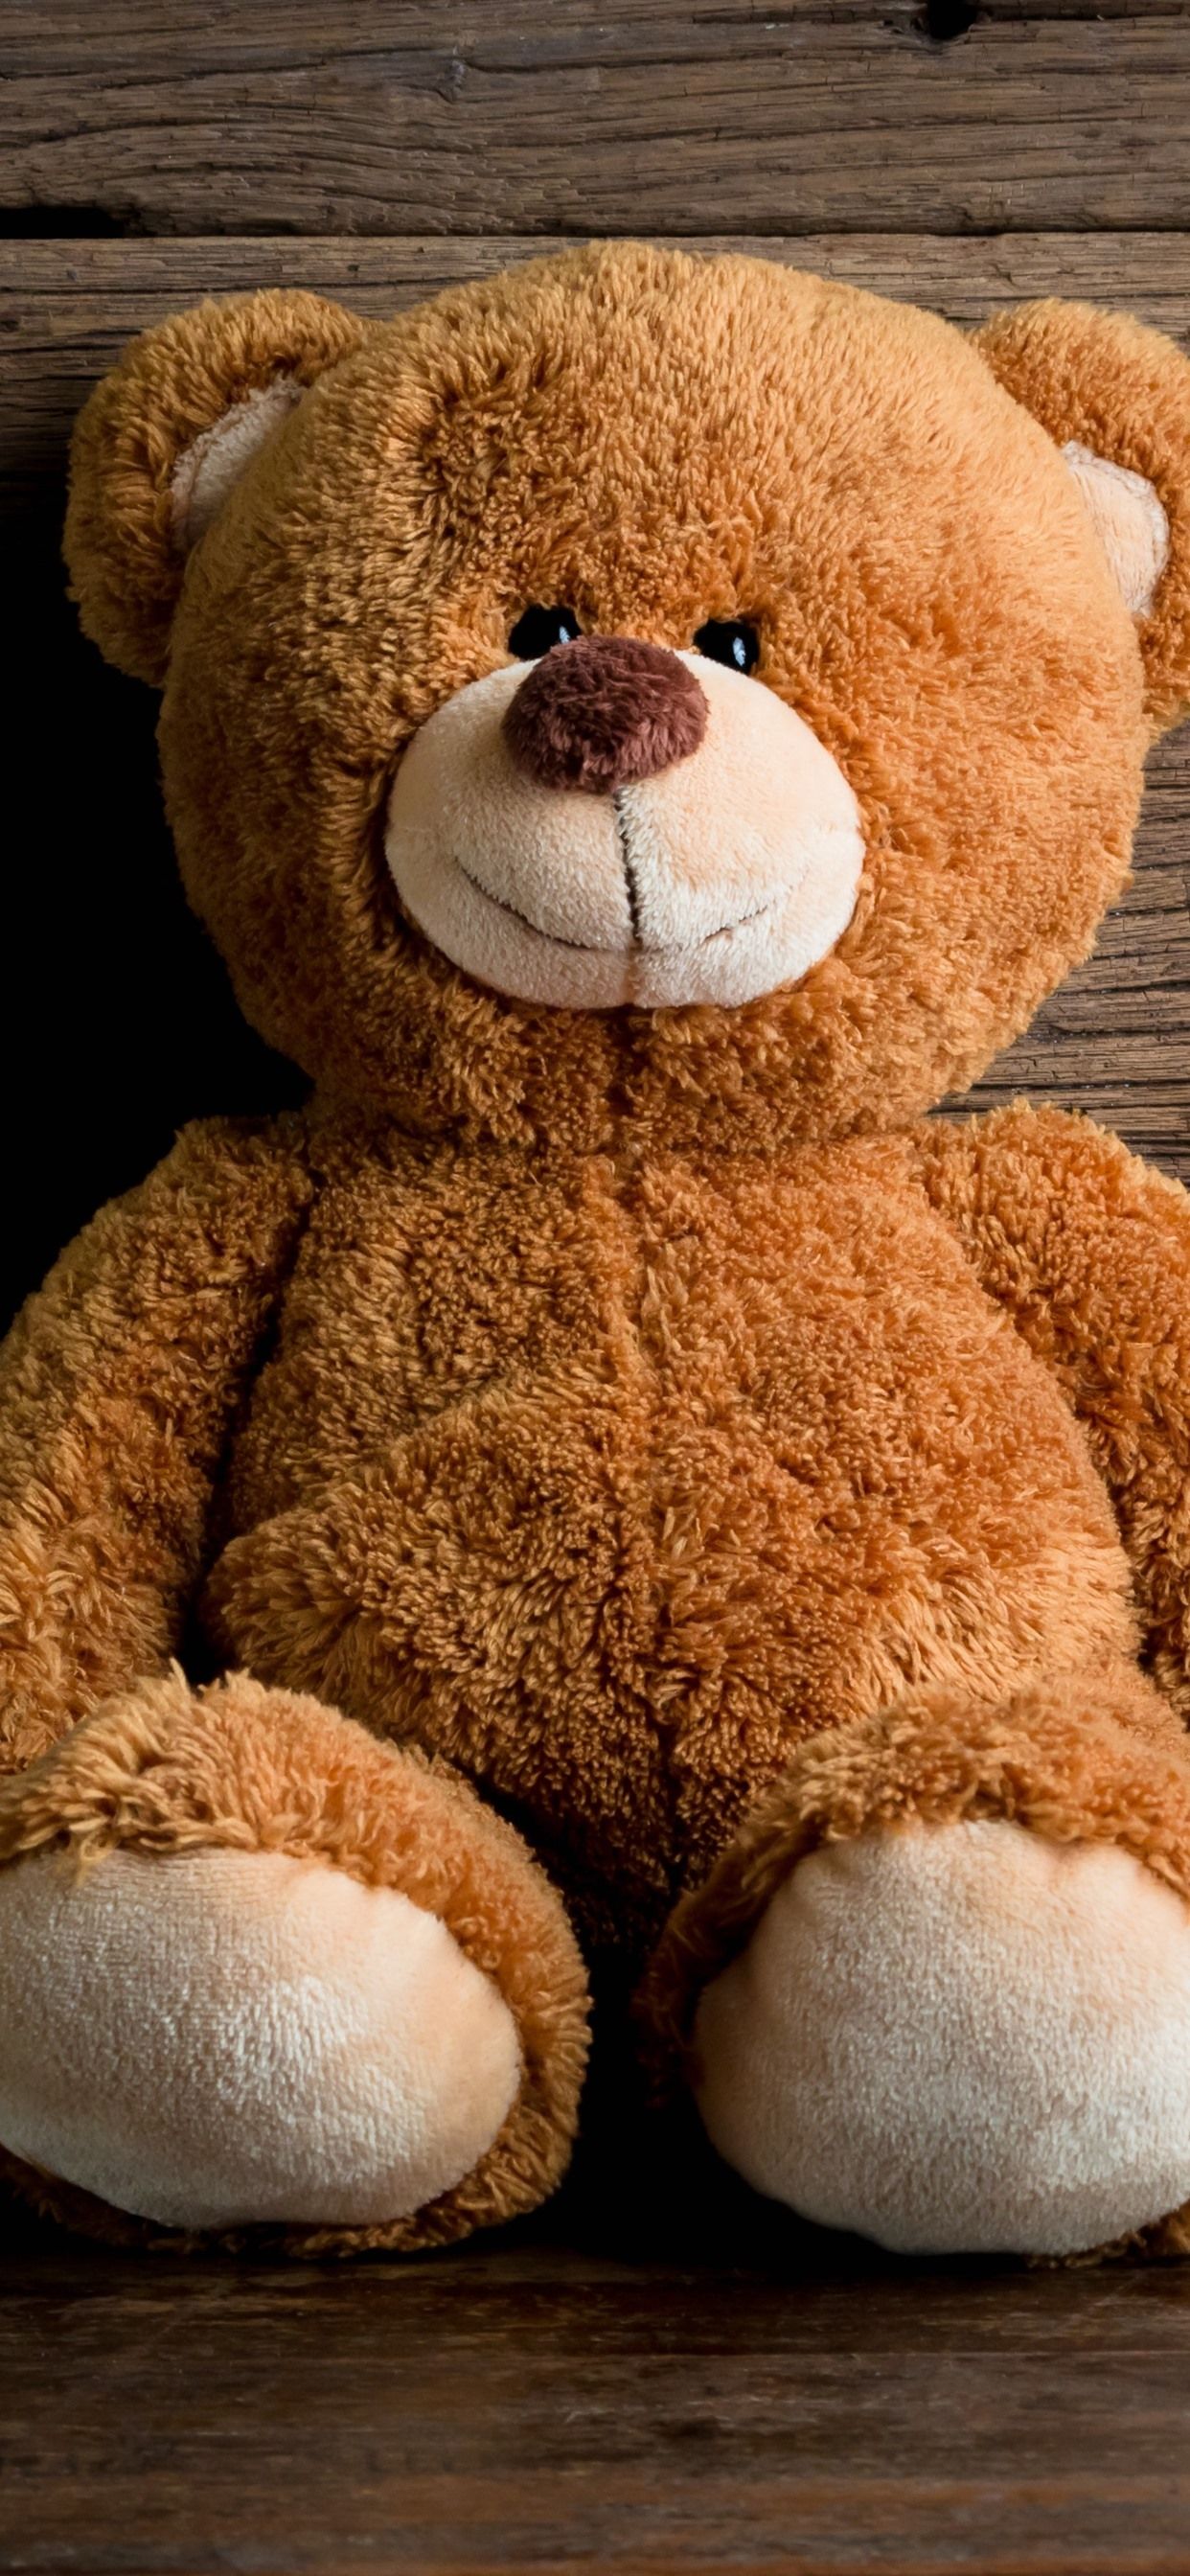 Happy Teddy Day 2022 Wishes Images, Quotes, Status, Wallpapers, Pics,  Greetings and Photos